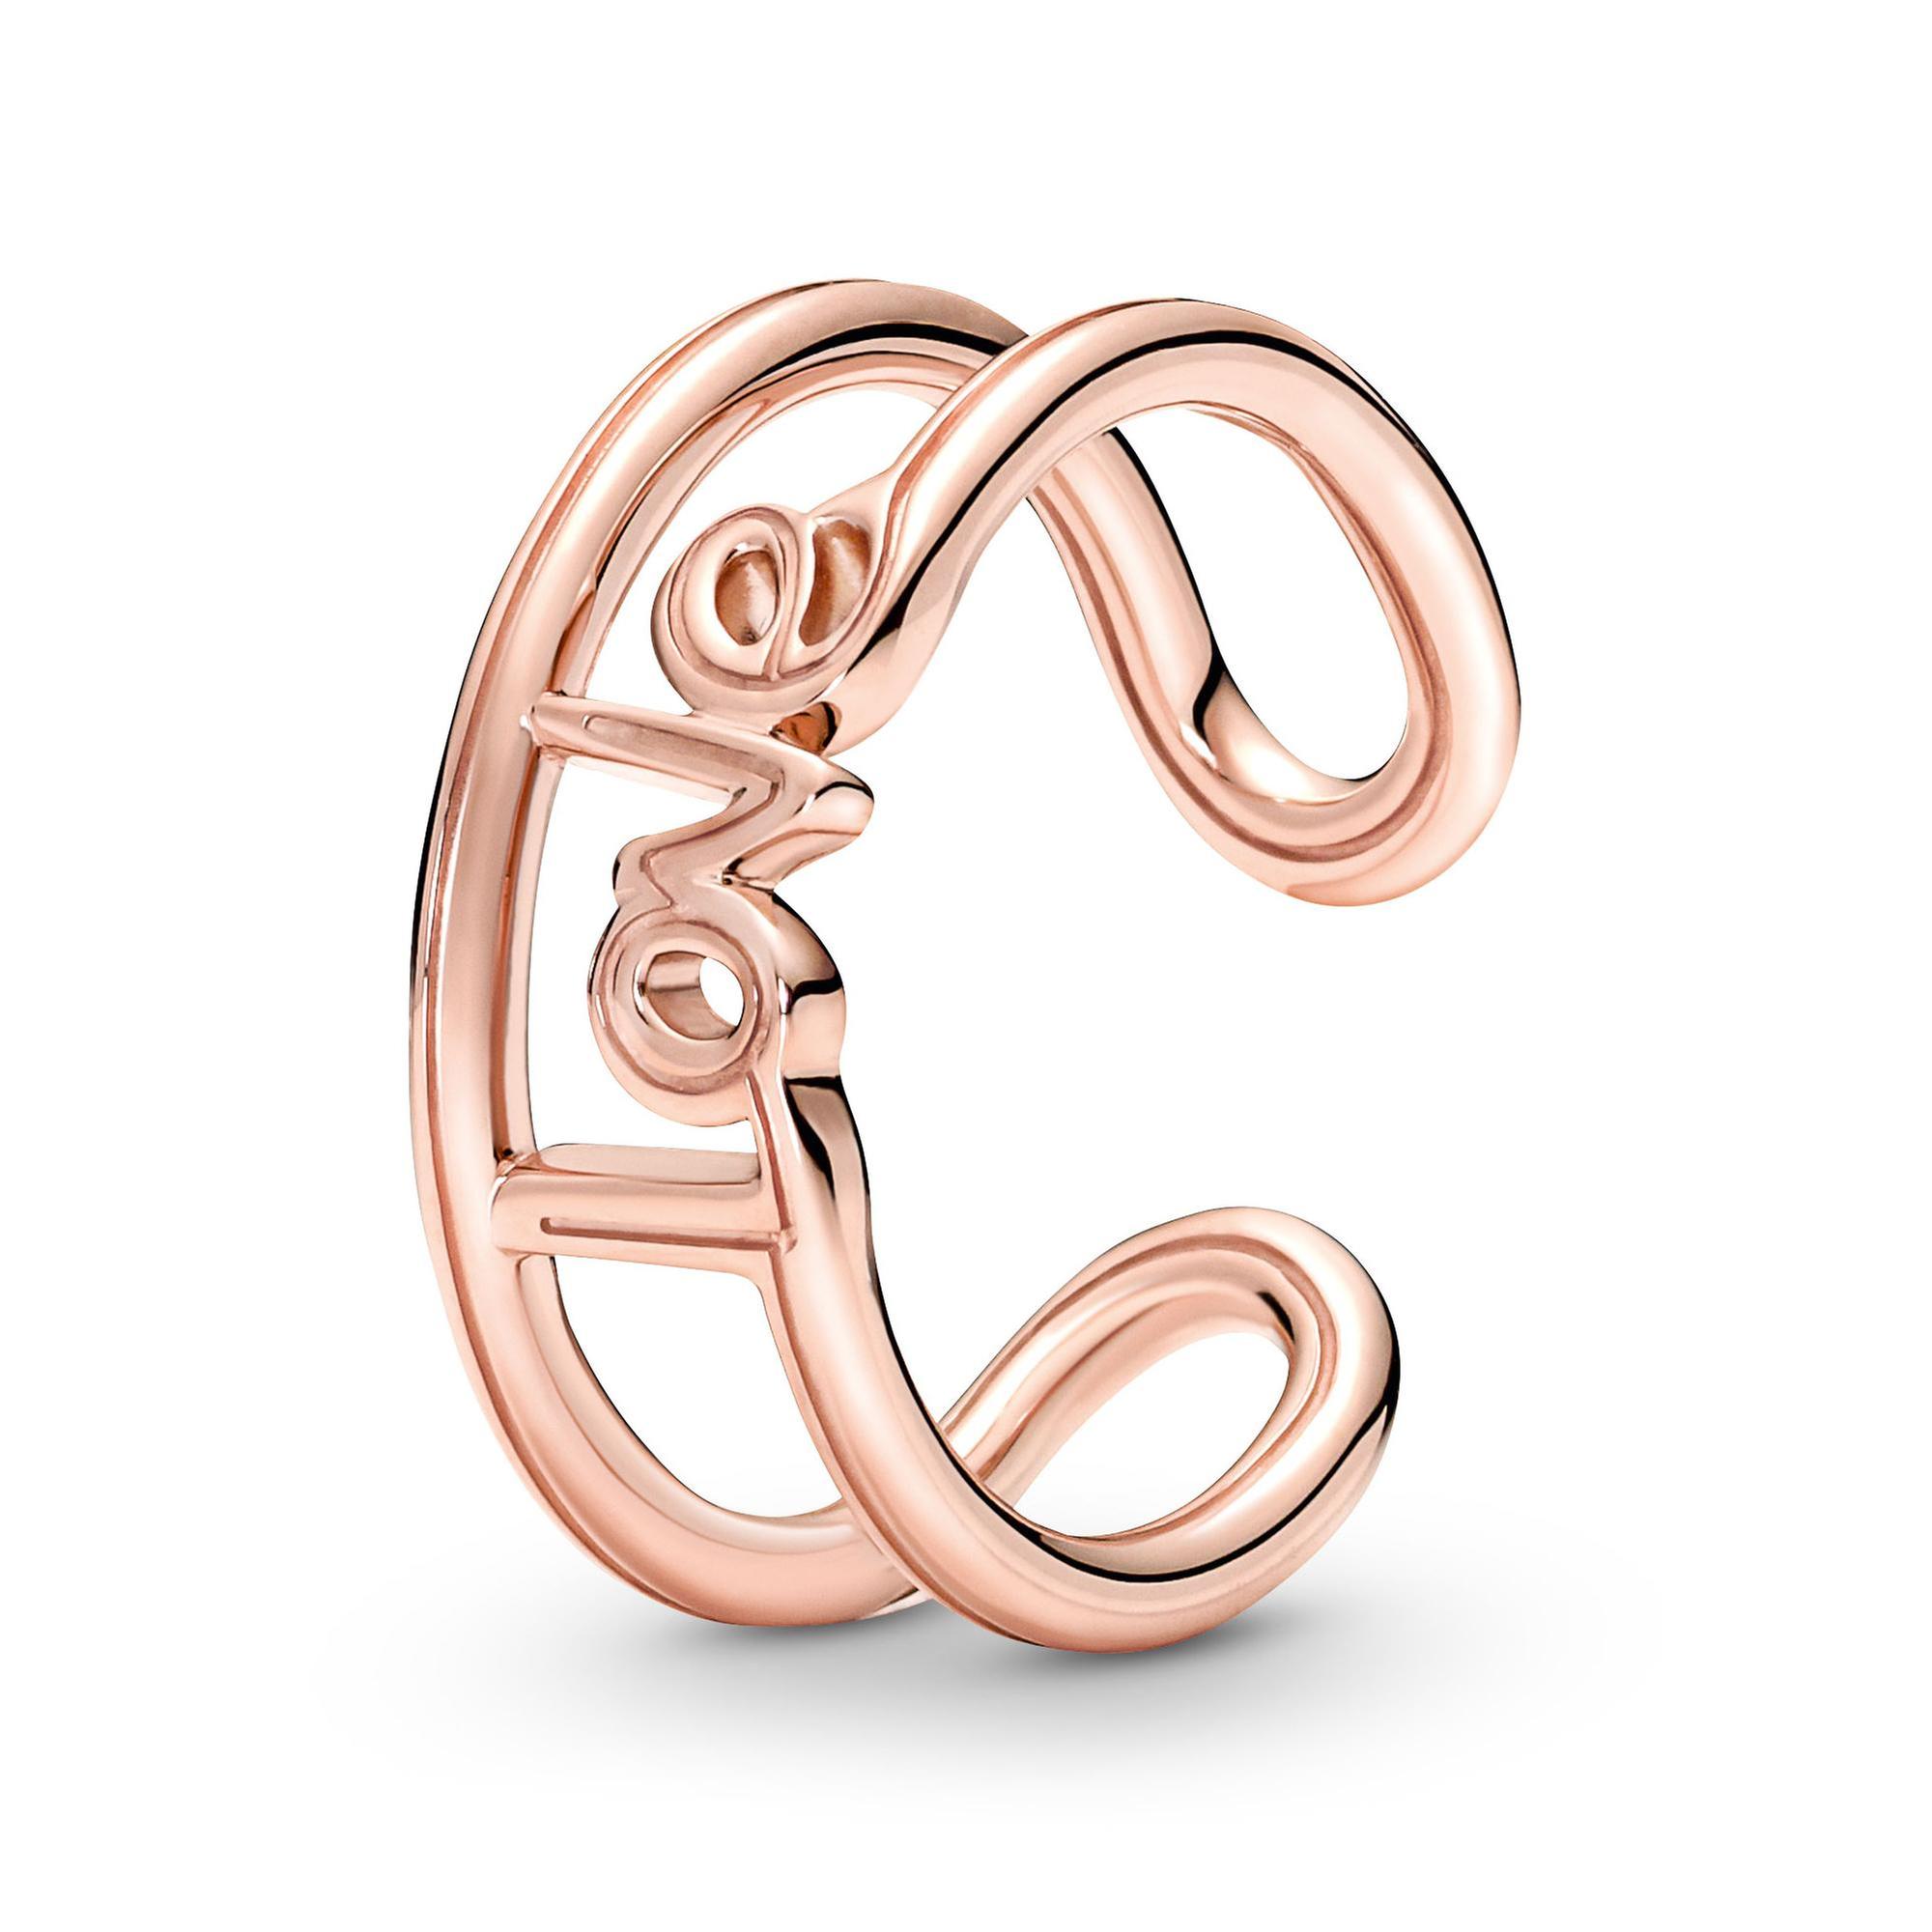 Pandora ME Love Open Ring, Rose Gold-Plated - Size 3.75